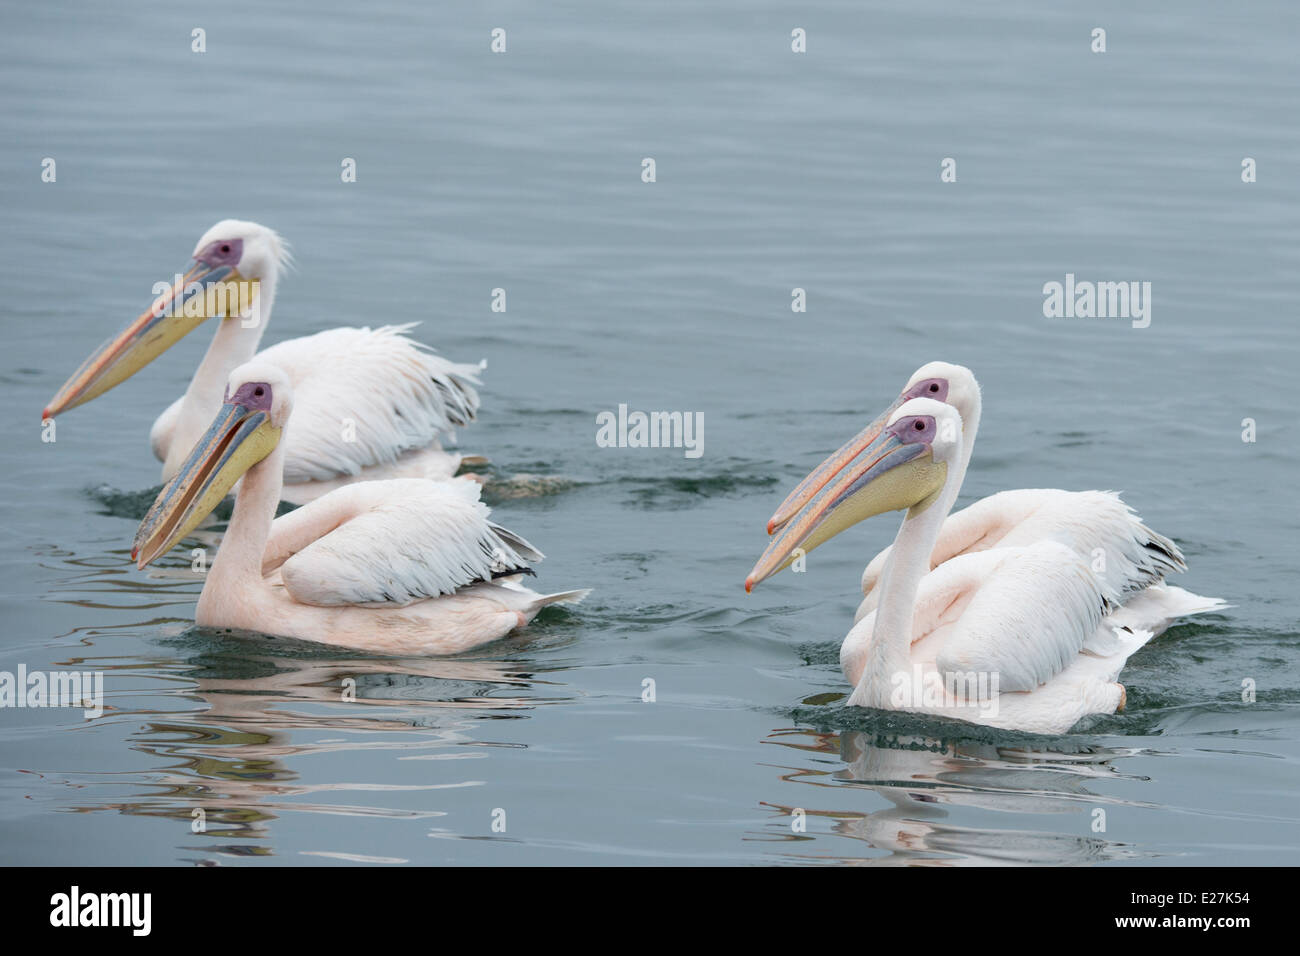 Great White Pelican (Pelecanus onocrotalus) also known as the Eastern White Pelican, Rosy Pelican. Walvis Bay, Namibia. Stock Photo